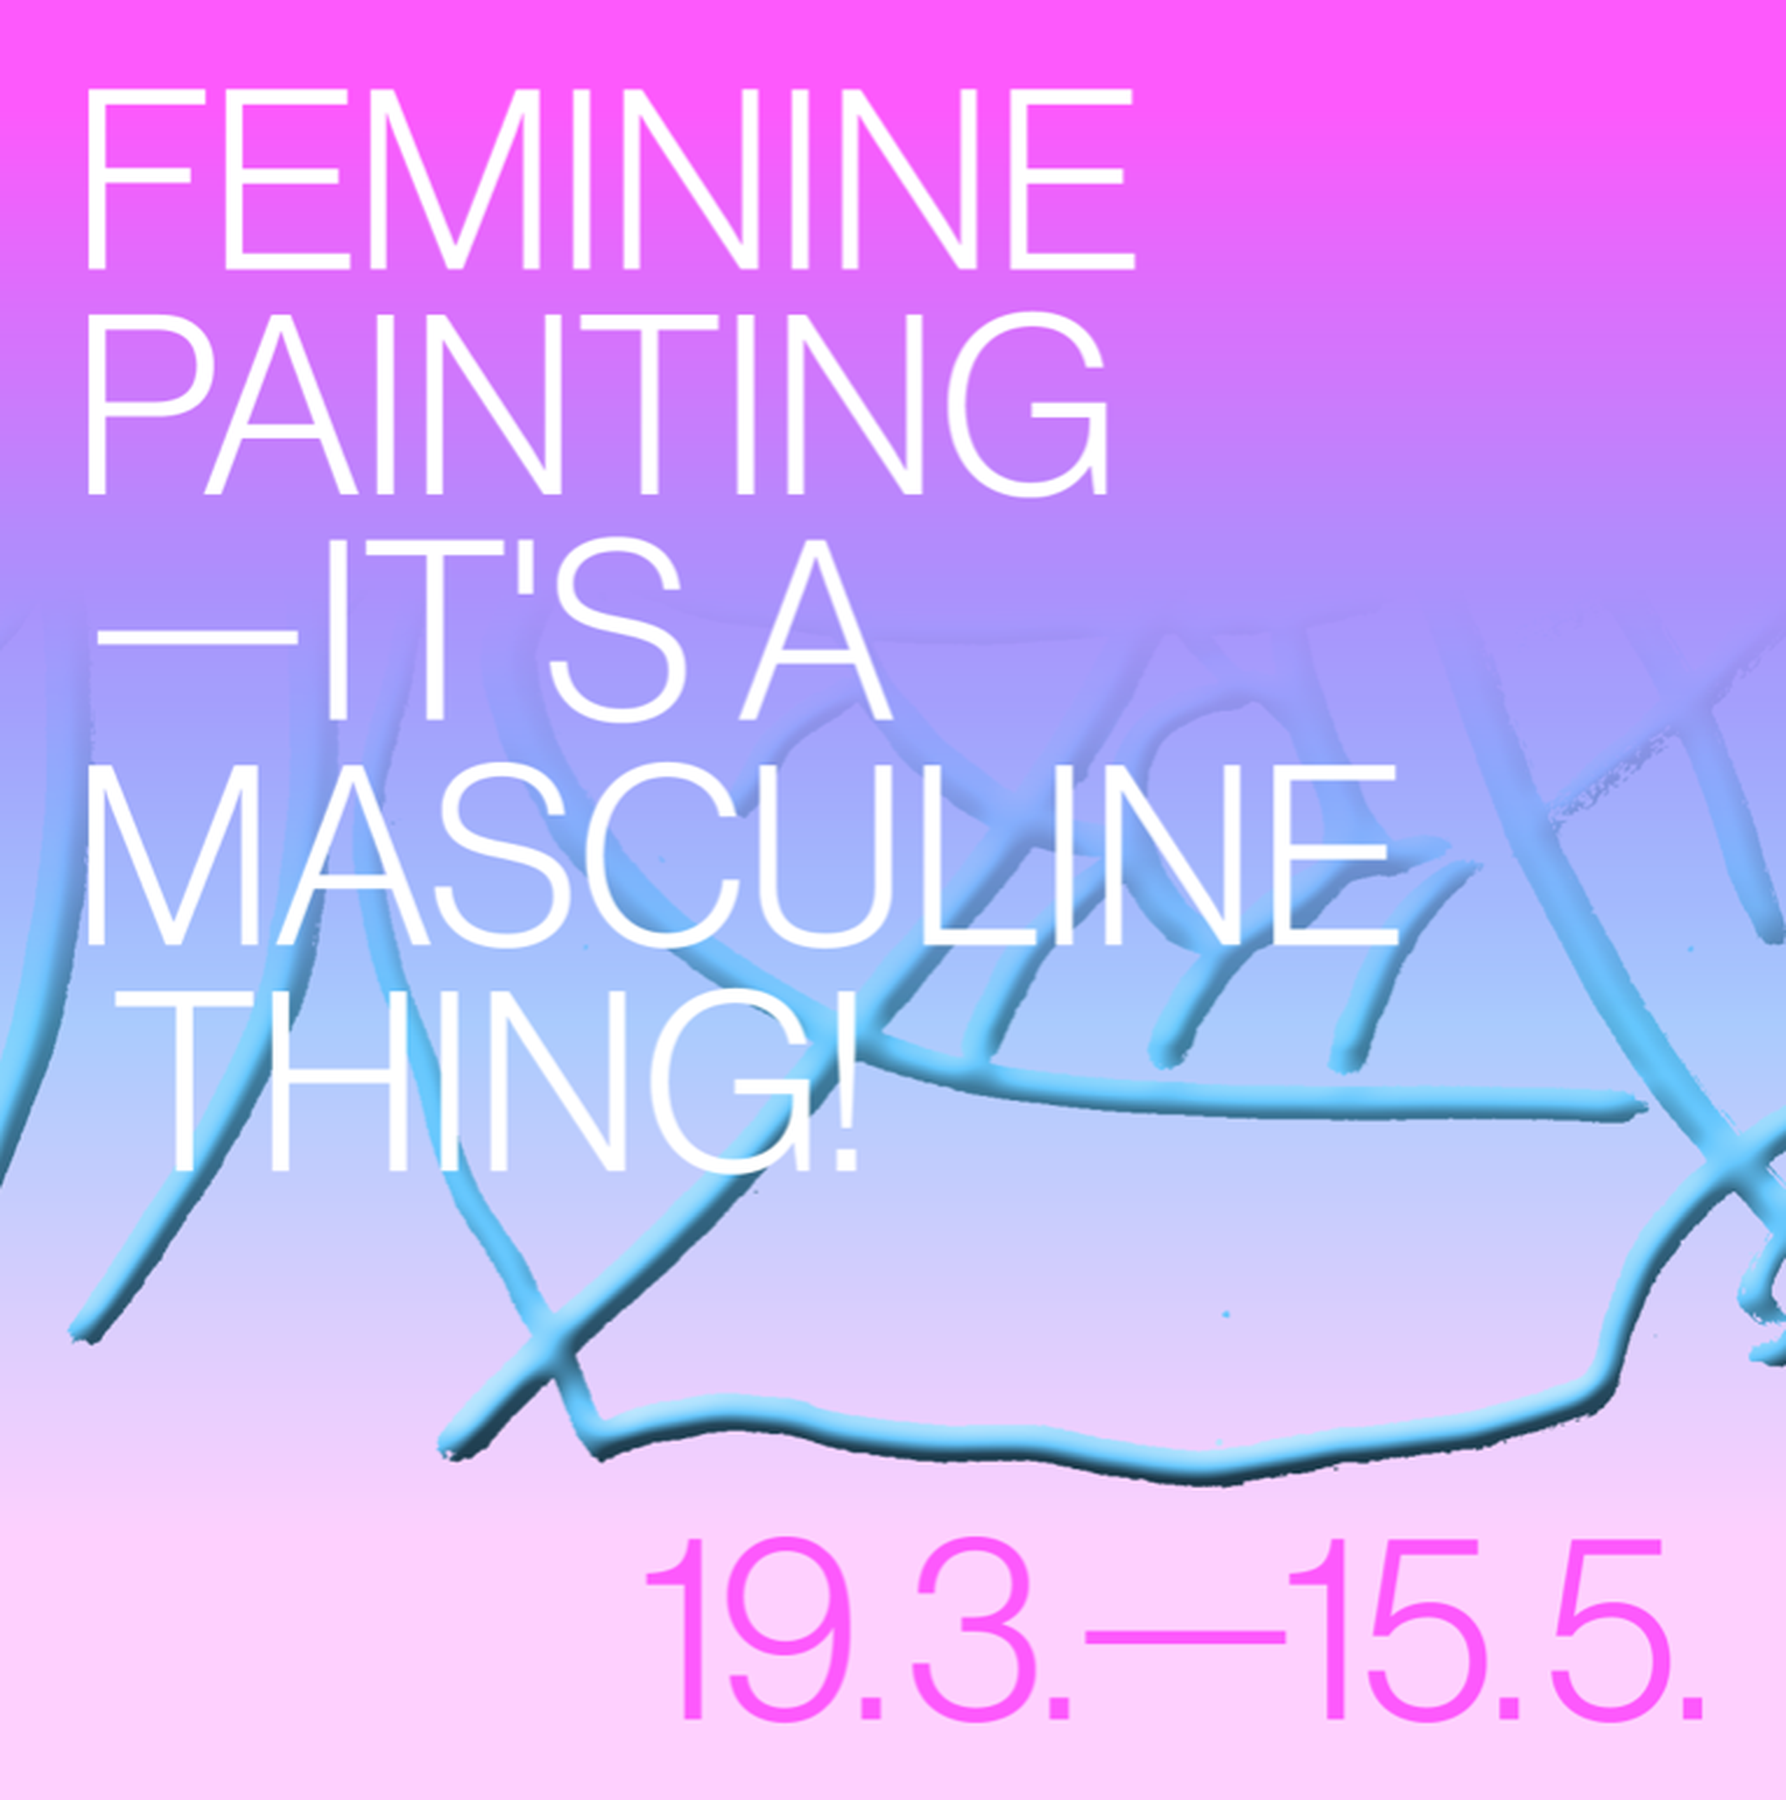 Feminine Painting – It‘s a Masculine Thing!